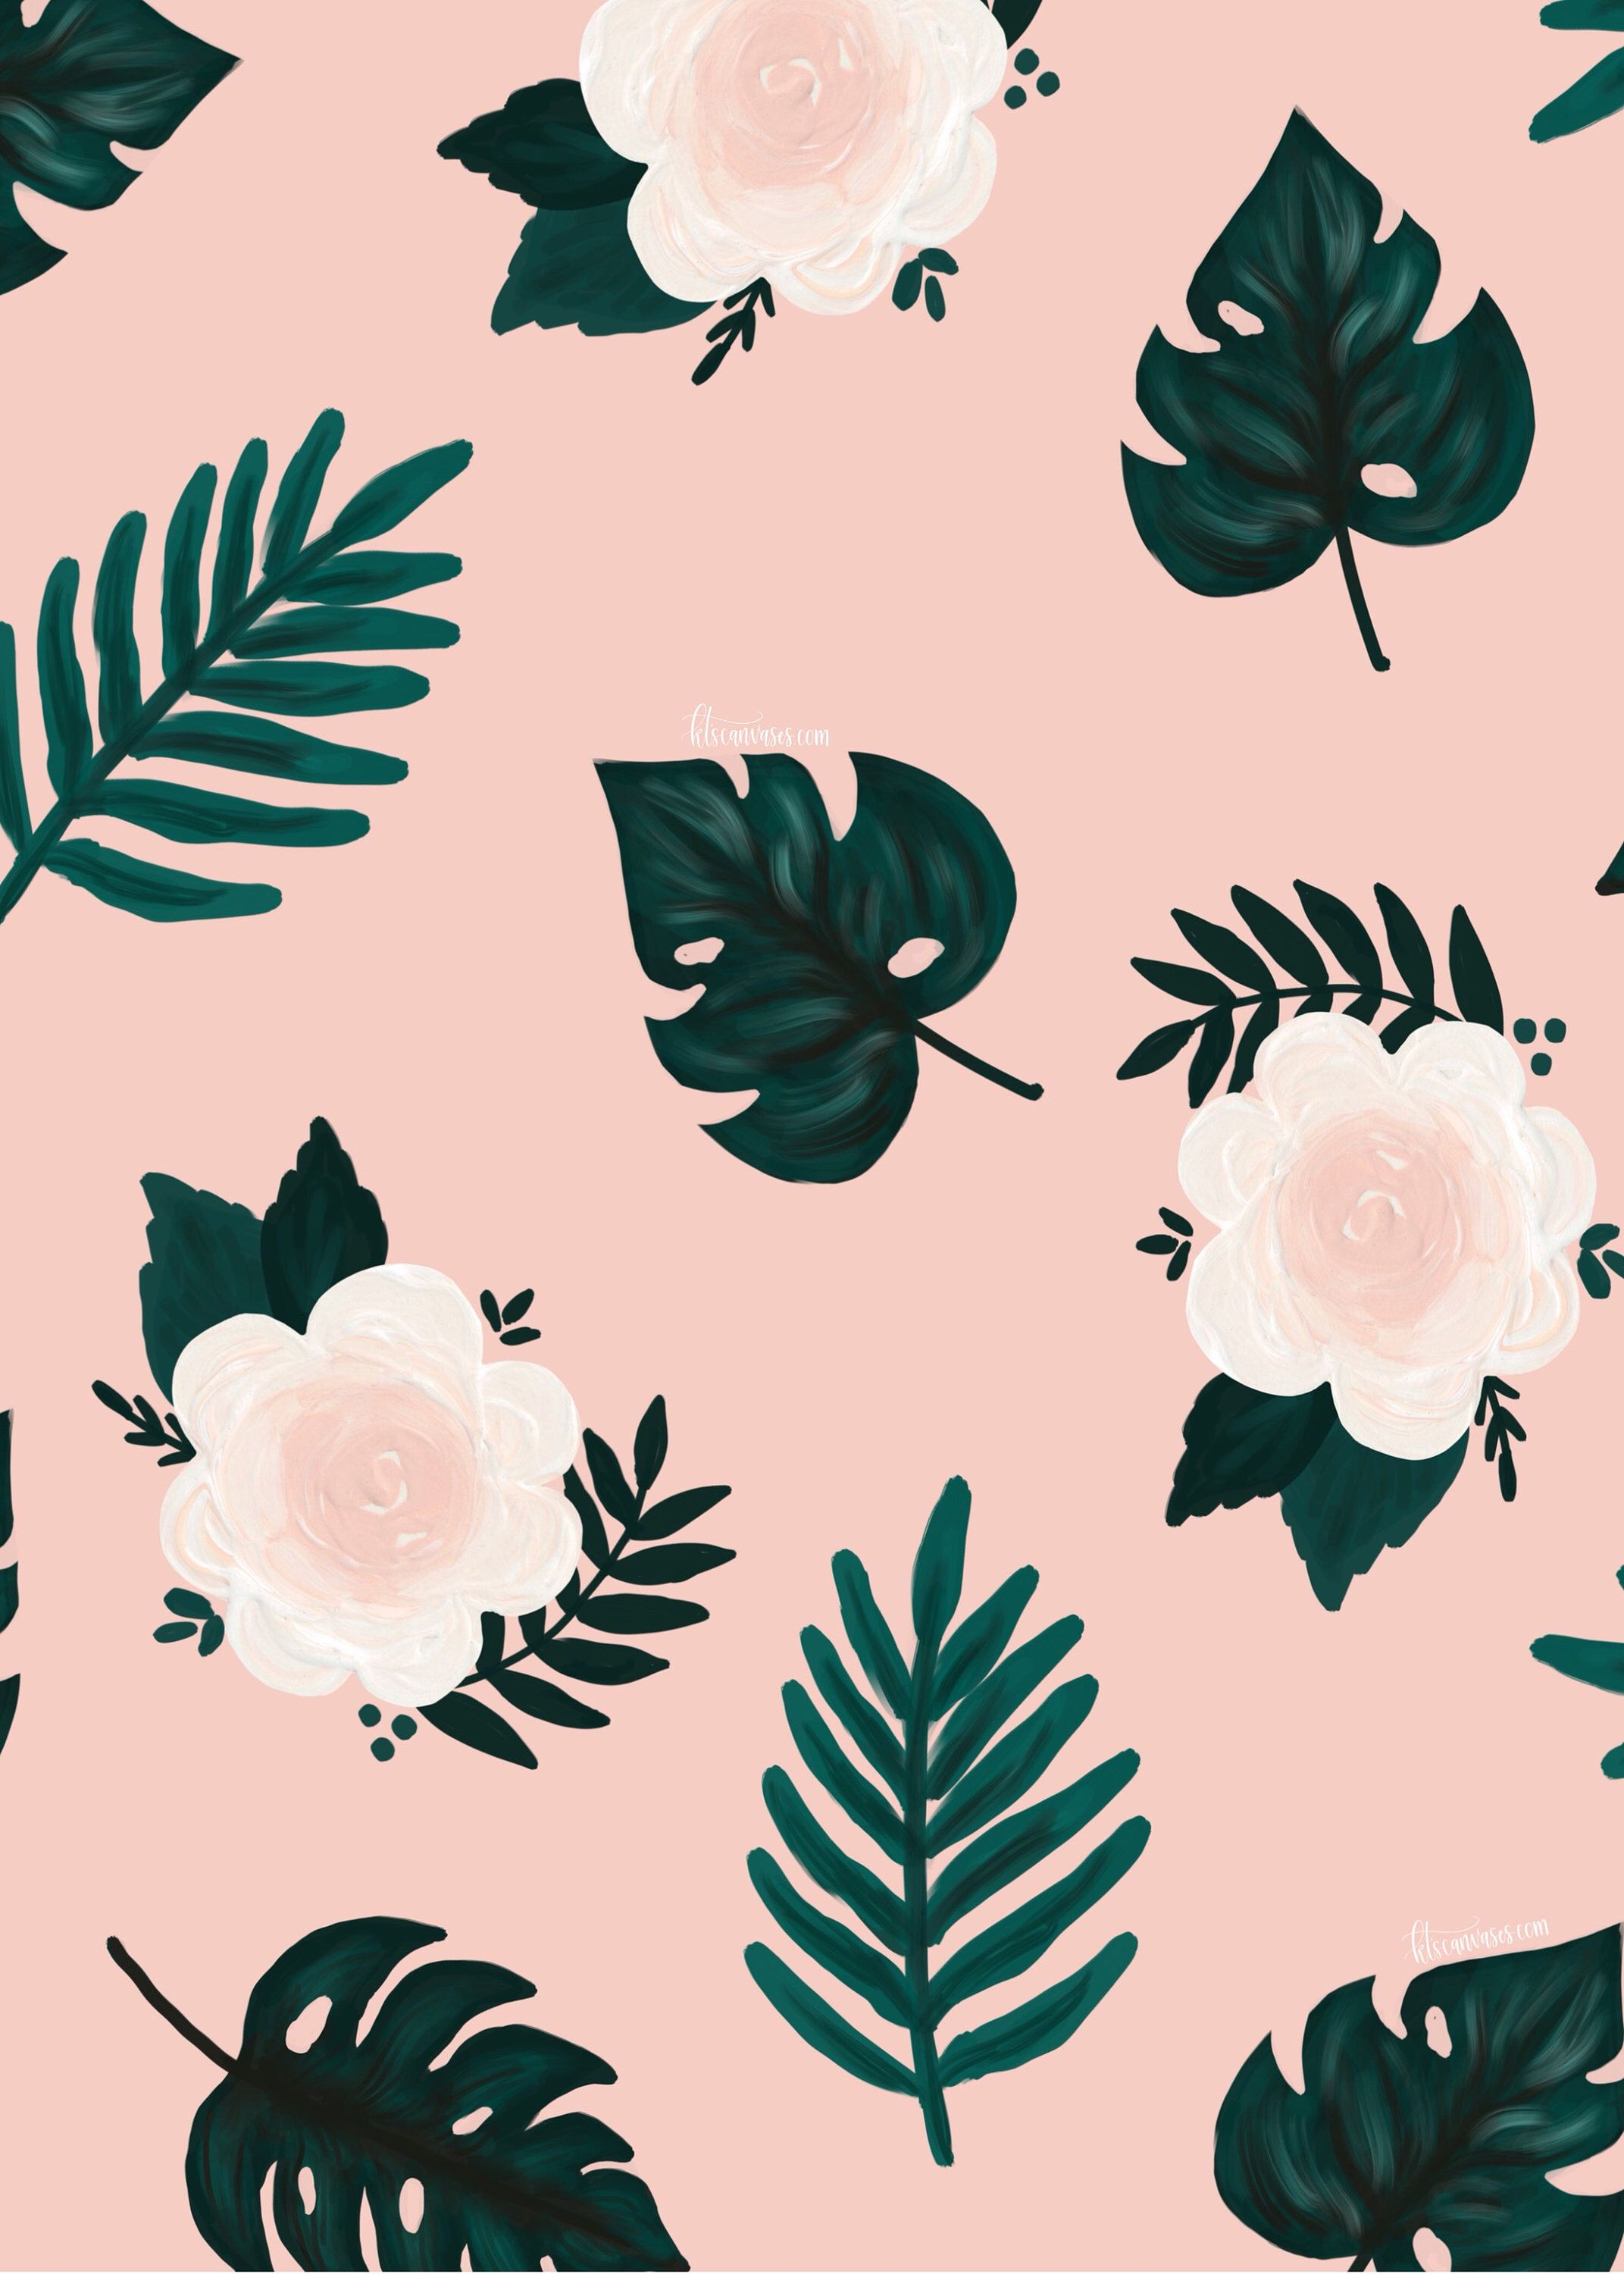 A pattern of flowers and leaves on pink background - Leaves